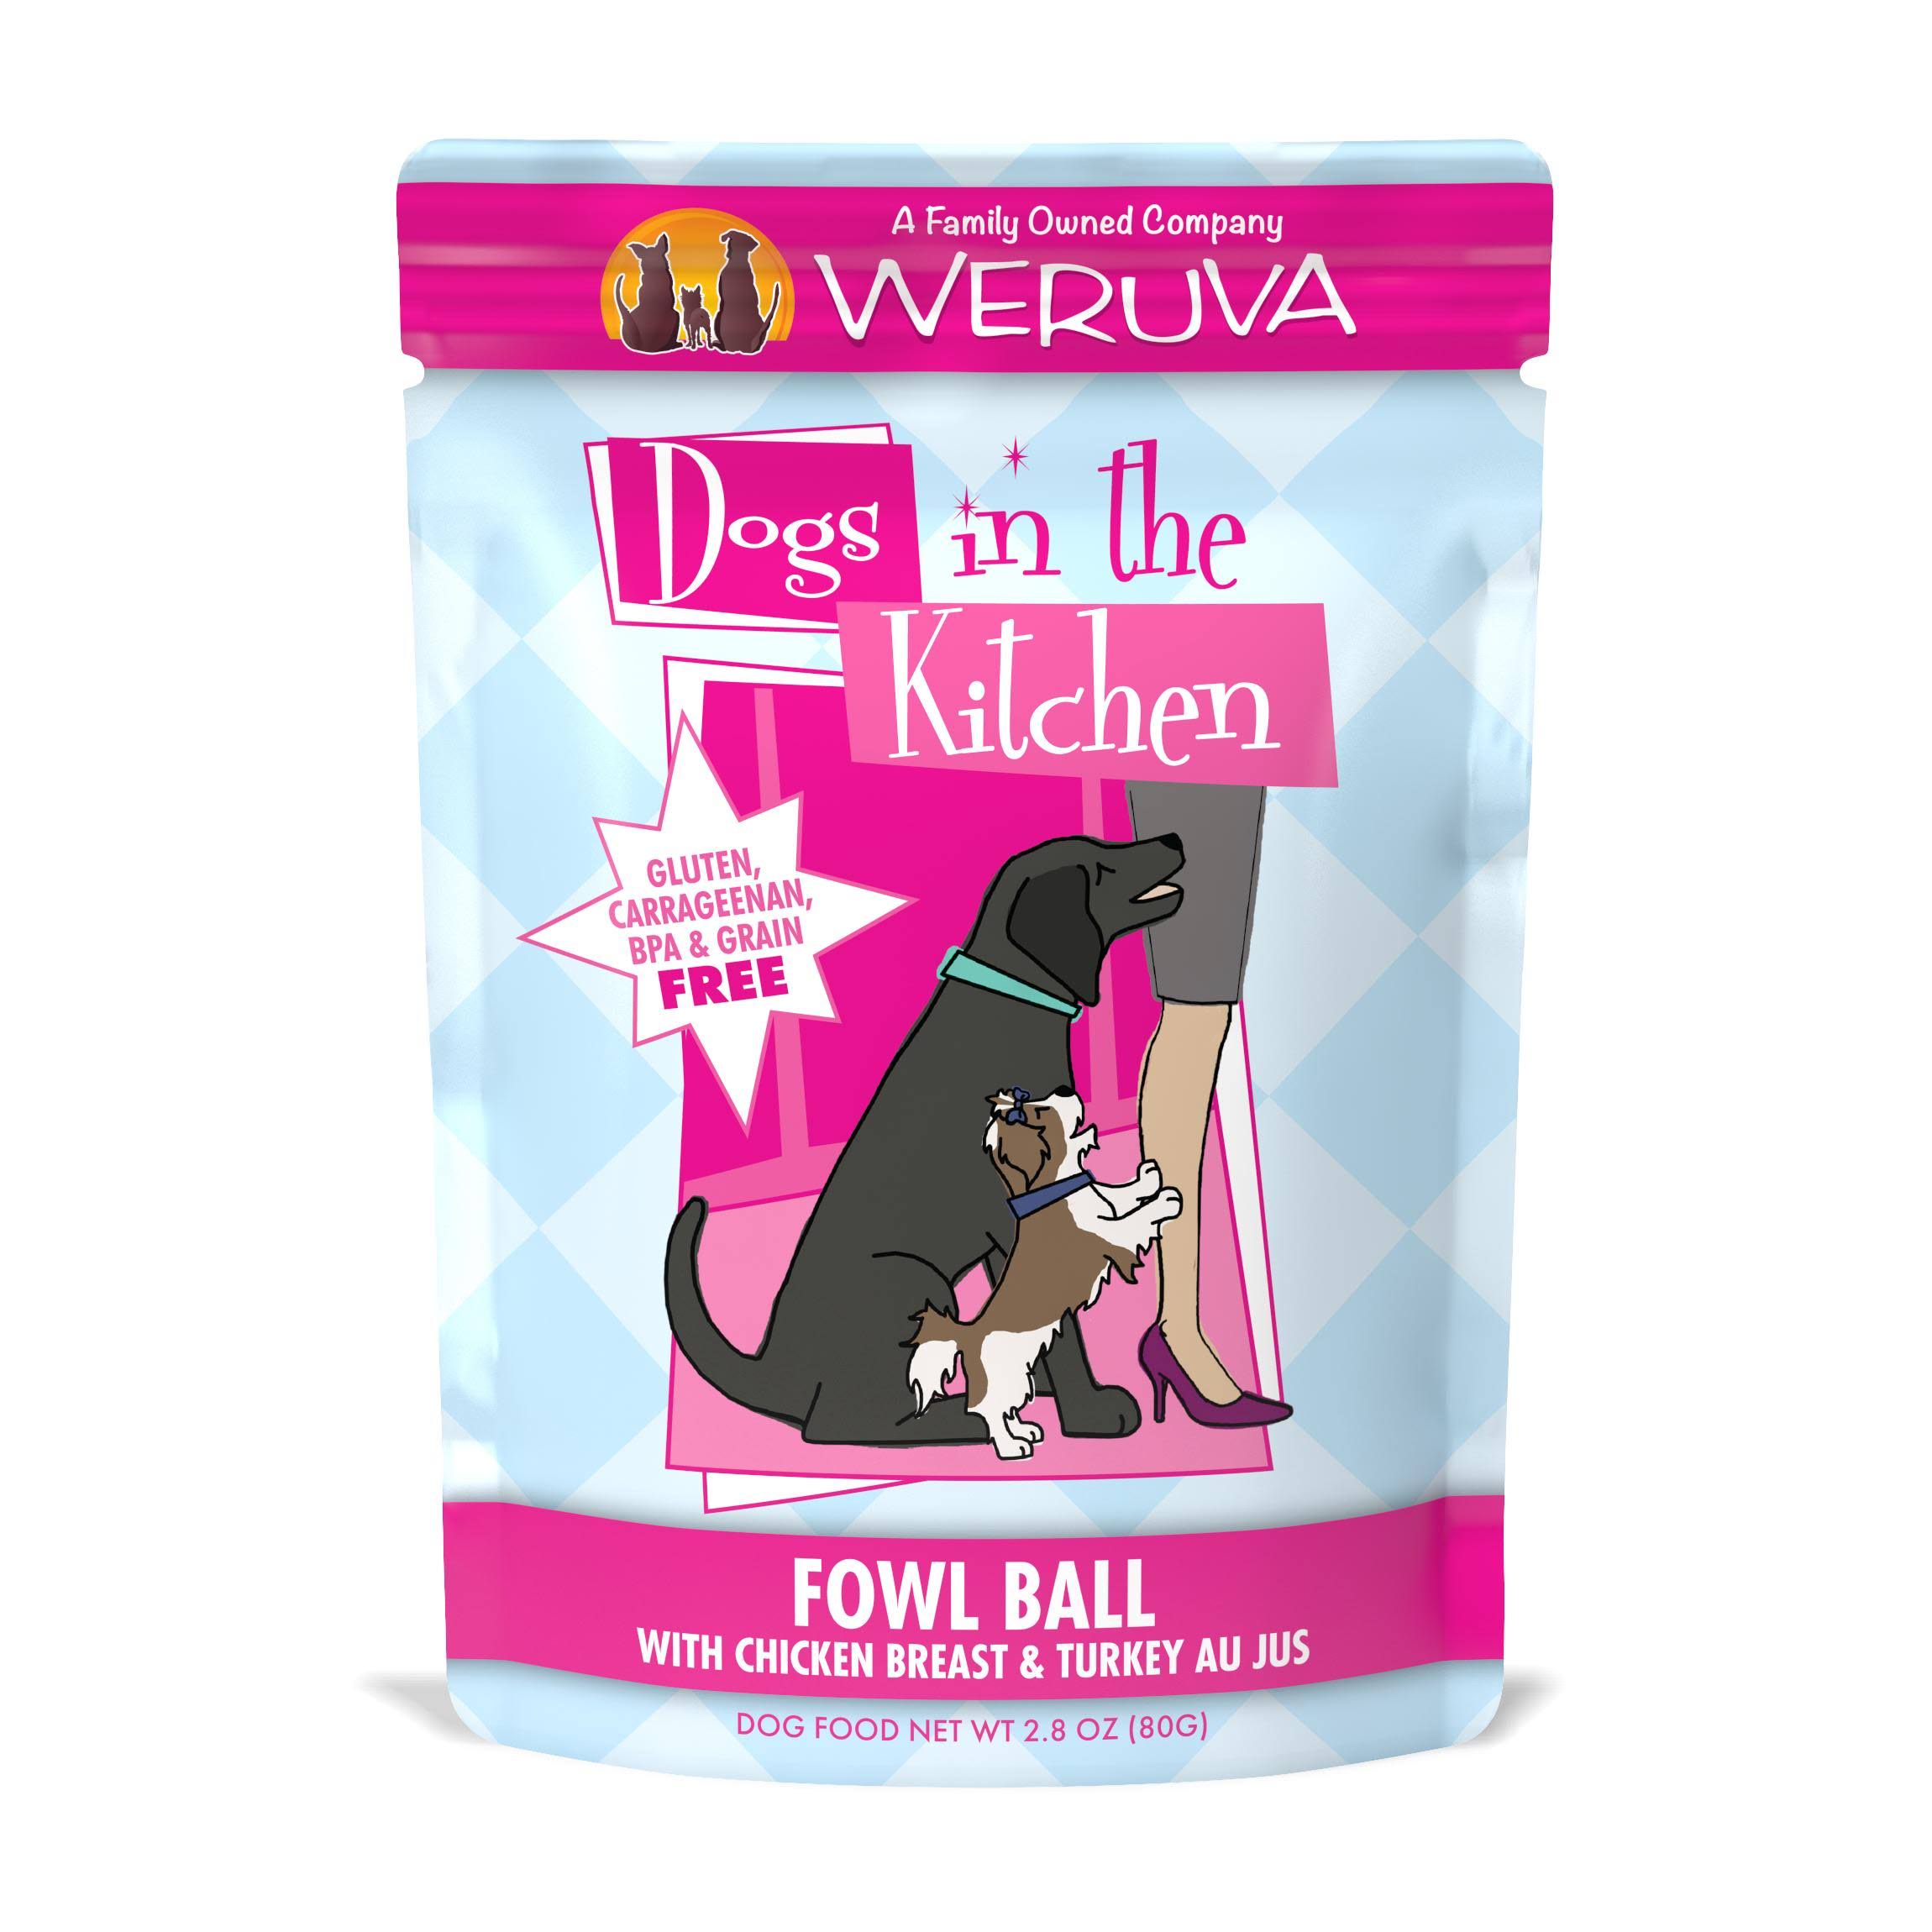 Weruva Dogs in the Kitchen Dog Food - Fowl Ball